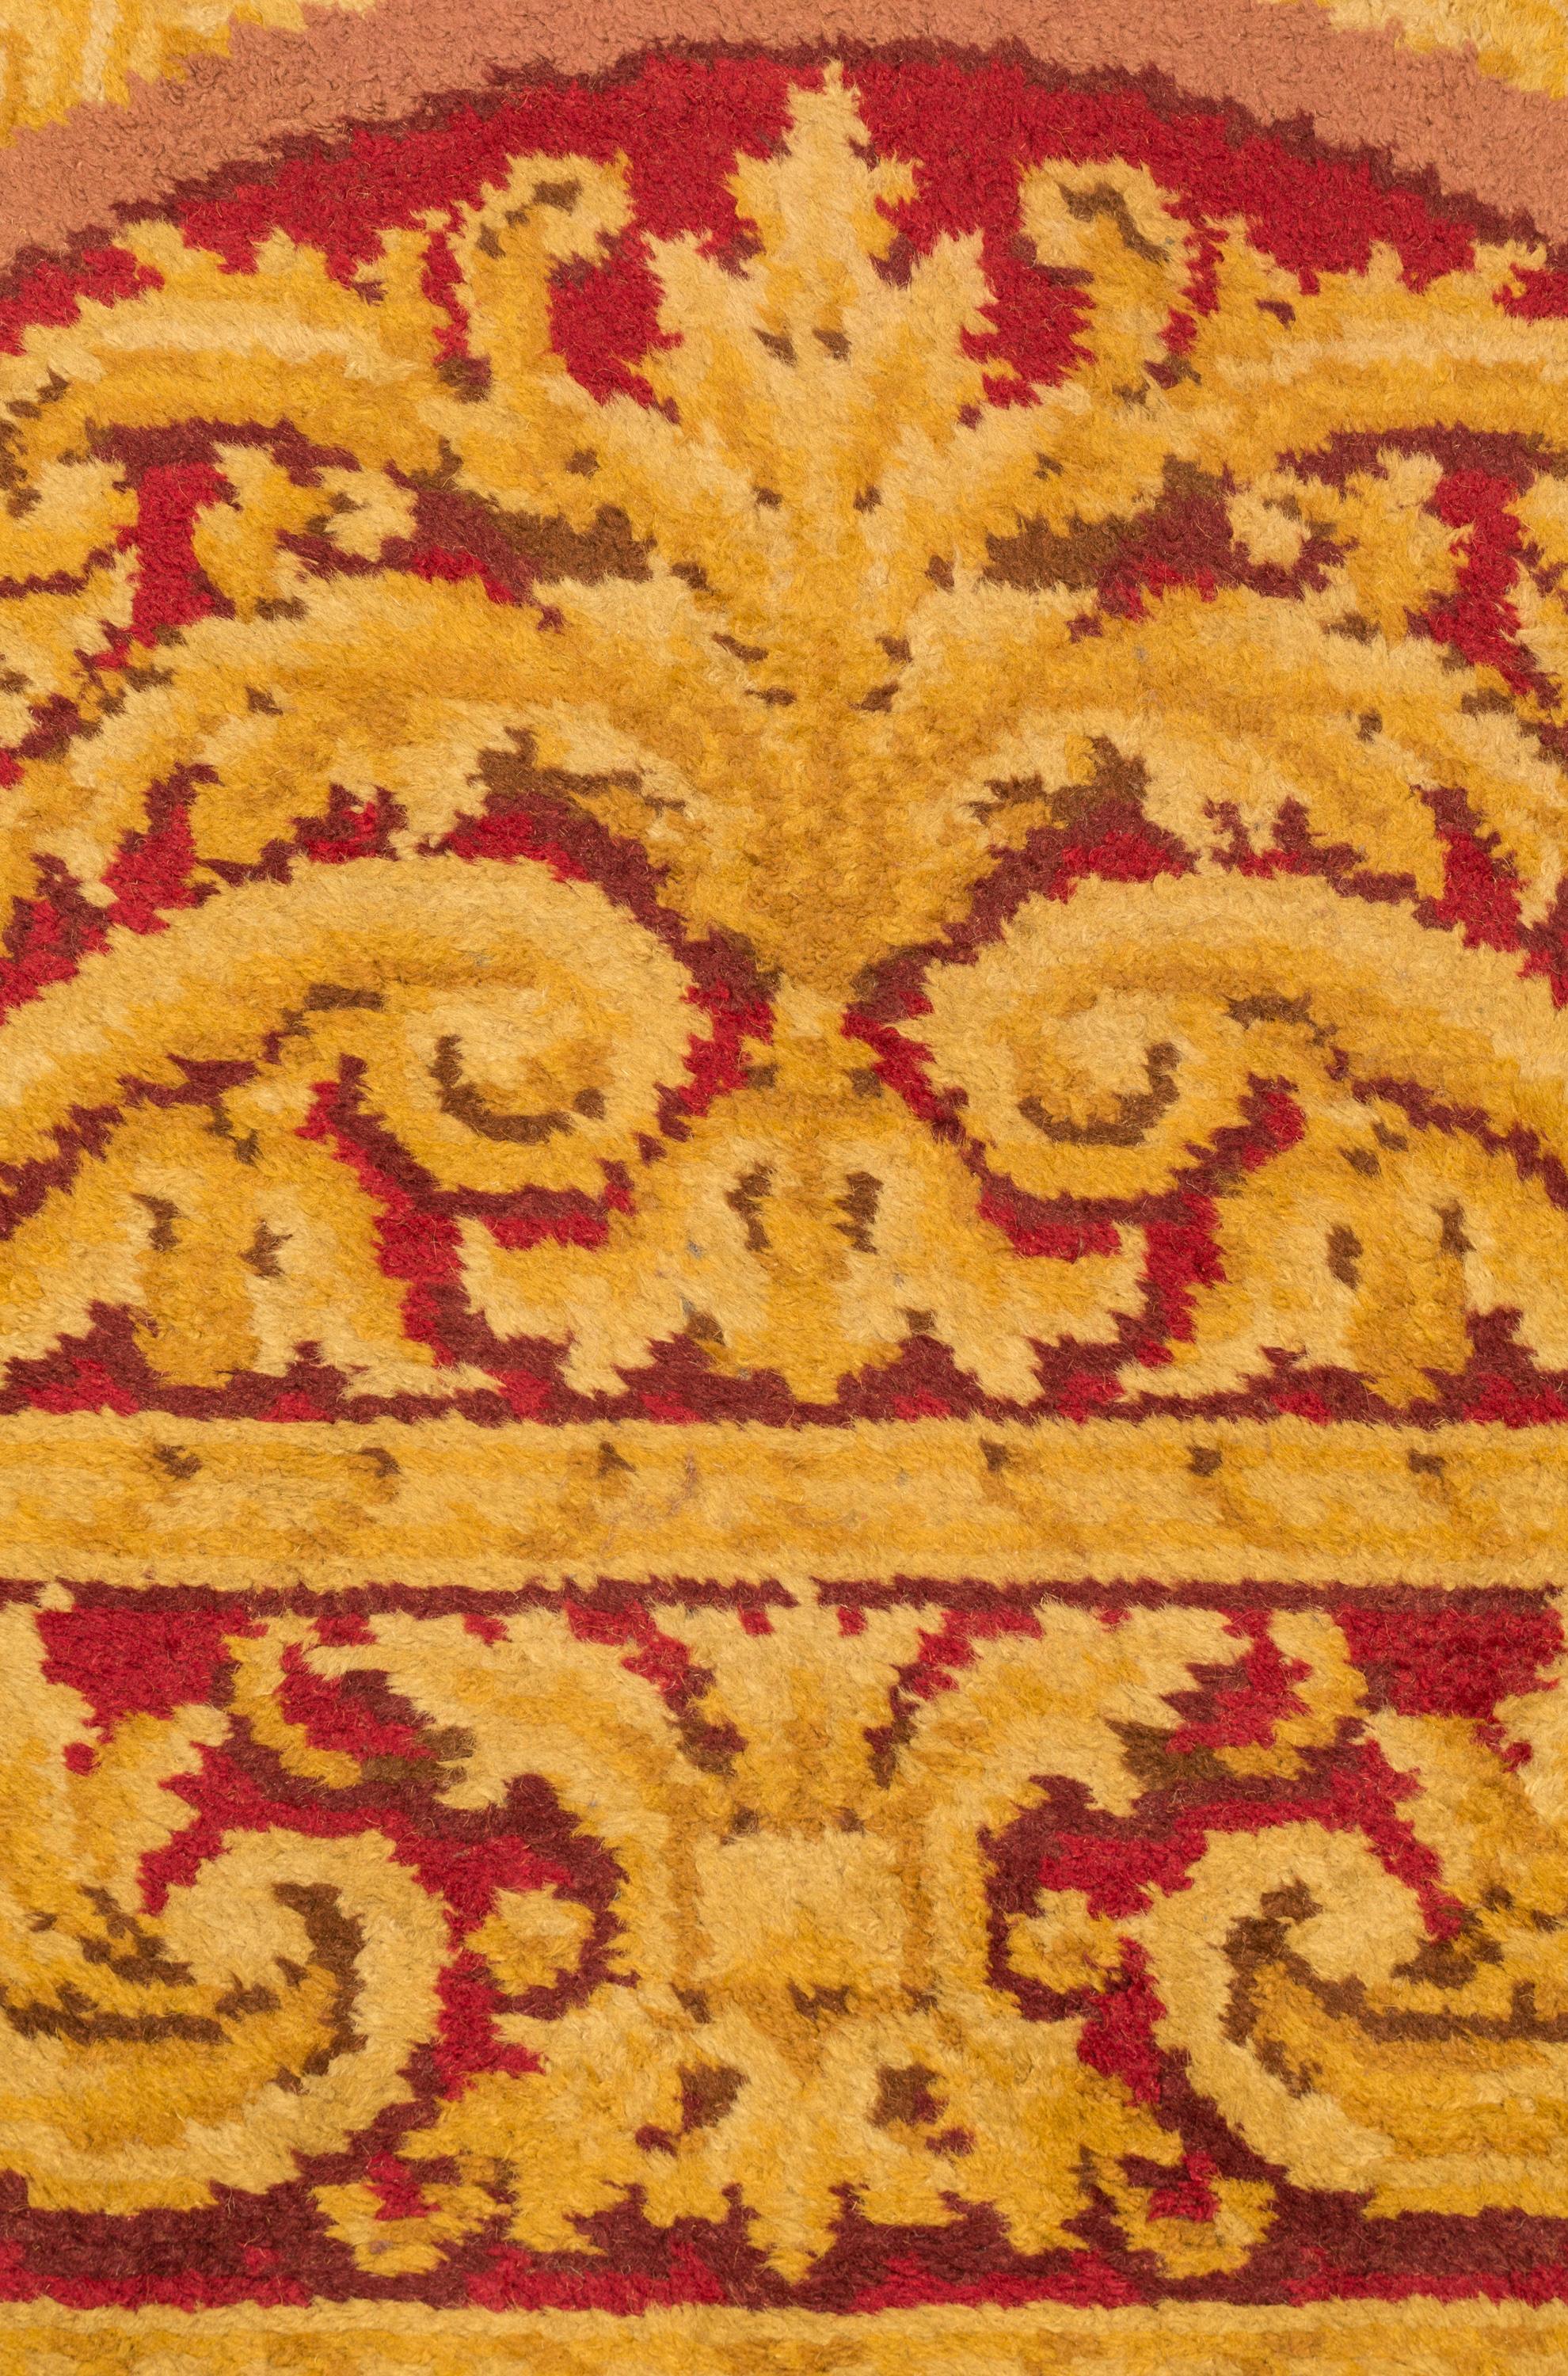 Woven Large Colorful 19th Century Antique European Neoclassical Hallway, Runner Carpet For Sale